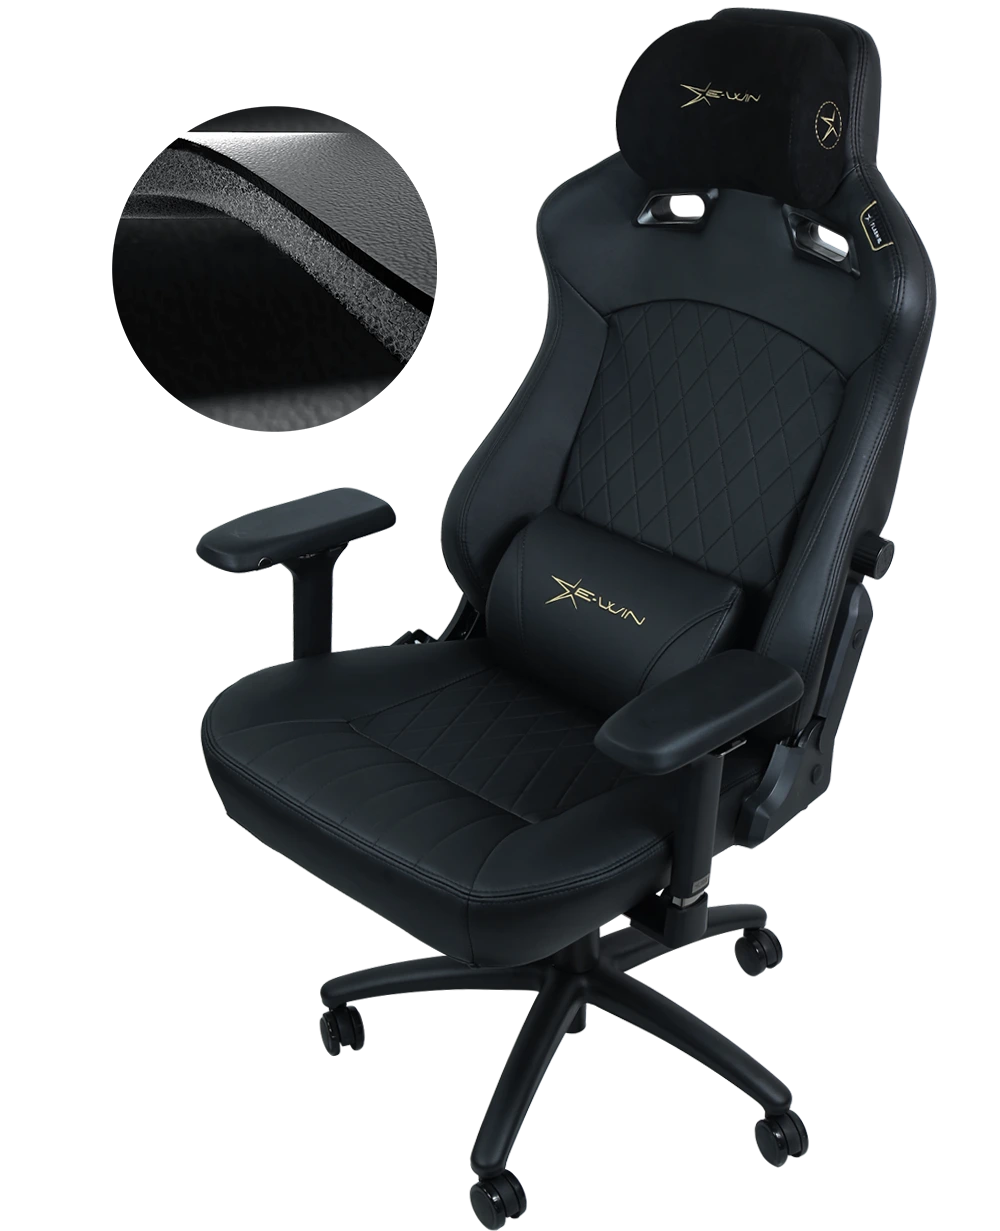 Evolution of E-WIN Gaming Chairs